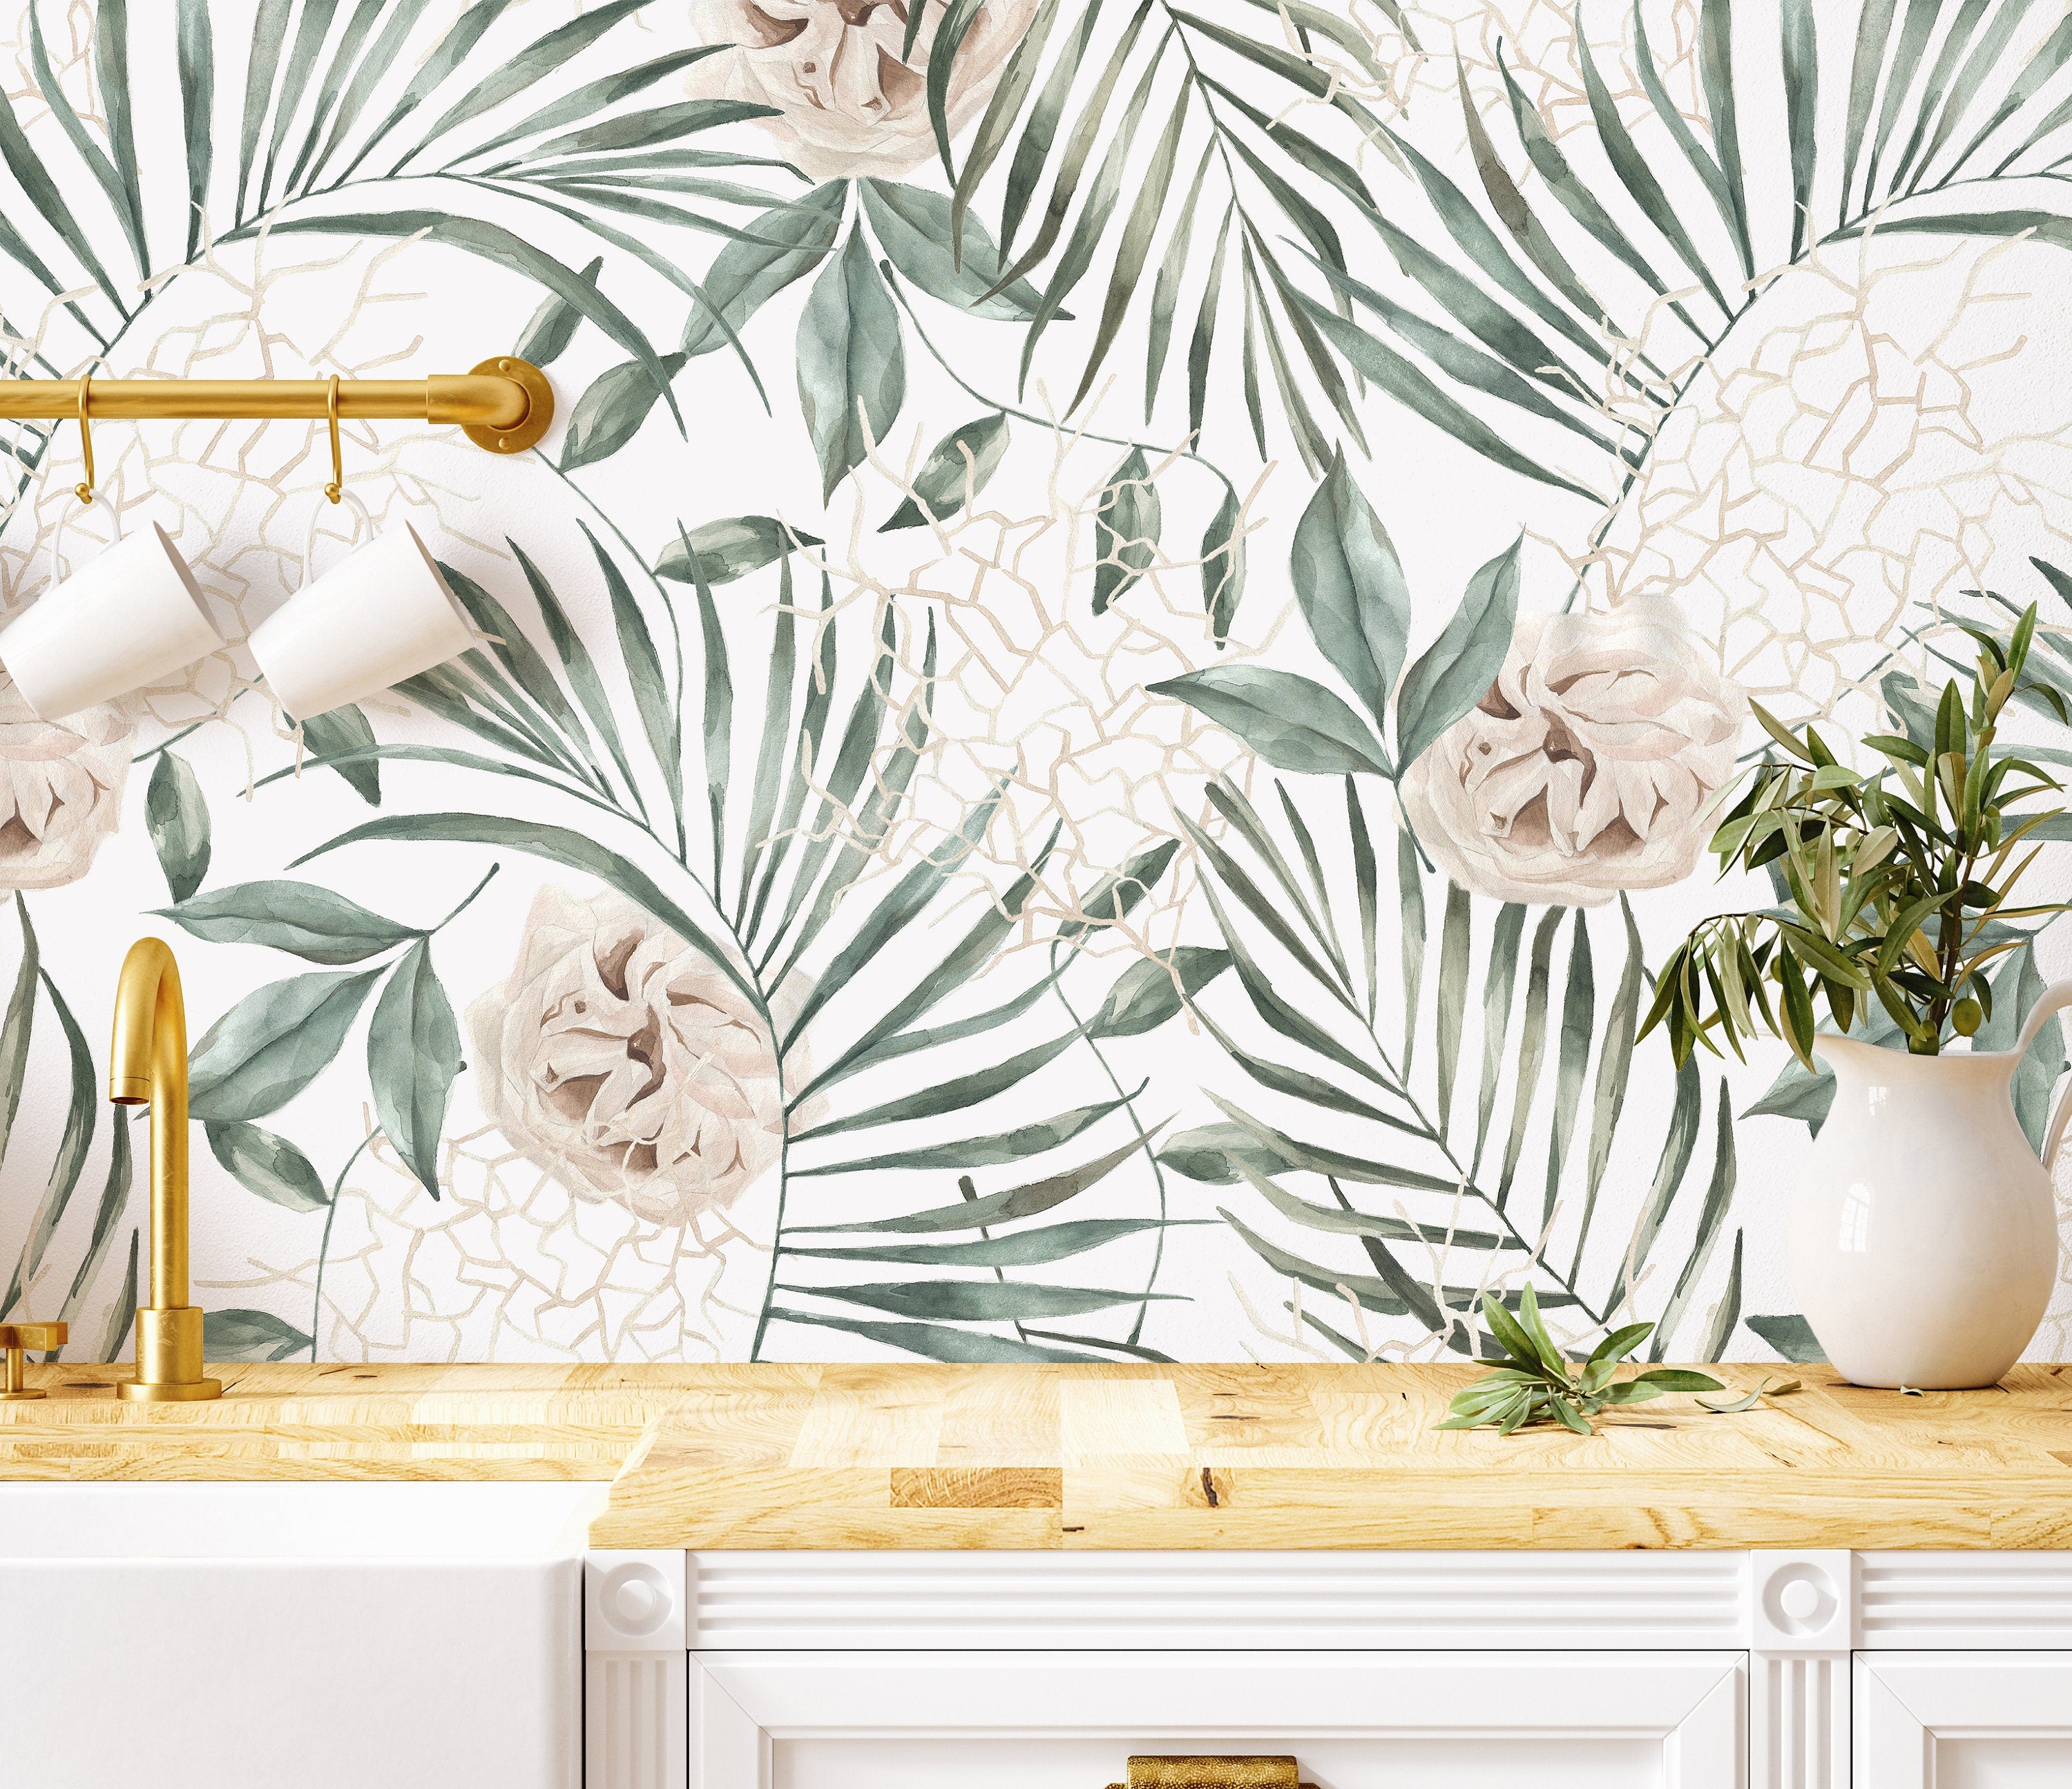 Large Tropical Palm Leaves Soft Floral Wallpaper | Wallpaper Peel and Stick | Removable Wallpaper | Wall Paper Peel And Stick 3441 - JamesAndColors